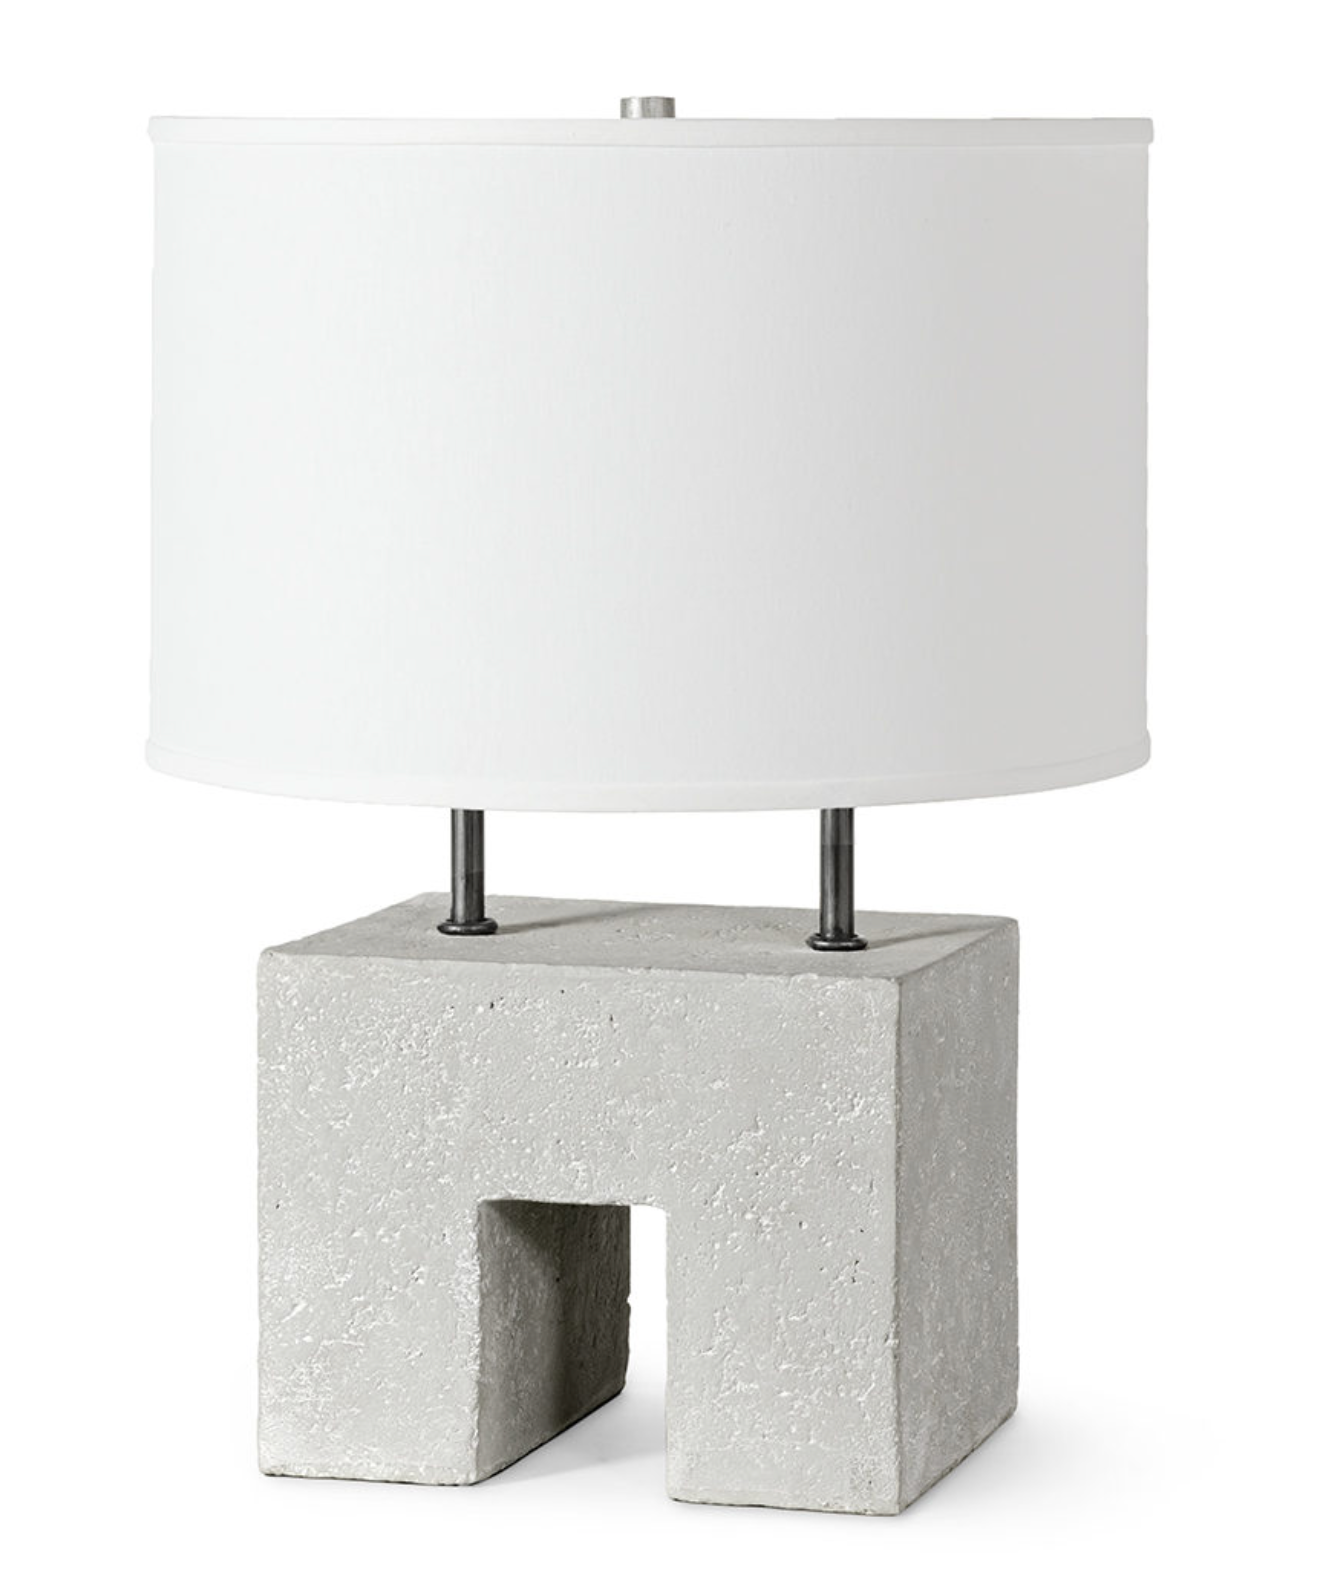 Rahl Table Lamp